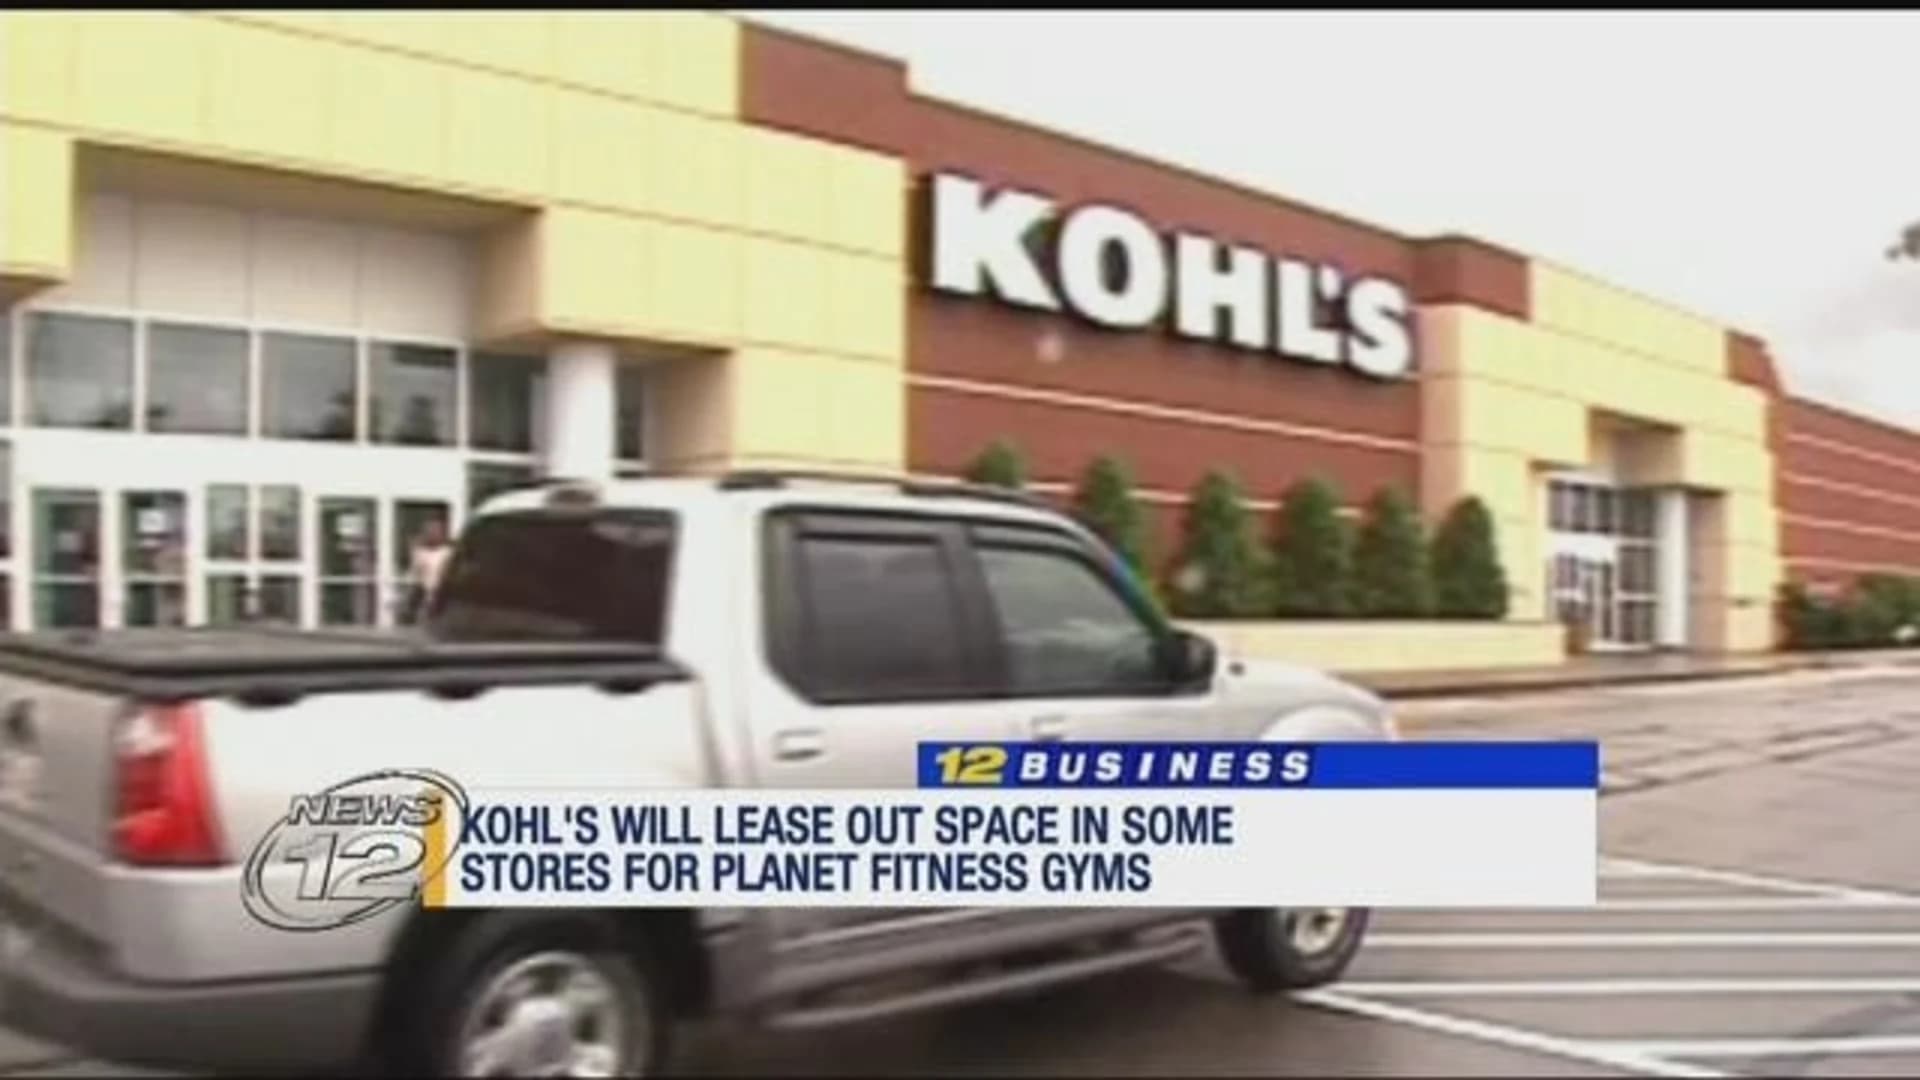 Kohl's to lease out space in some stores for Planet Fitness gyms